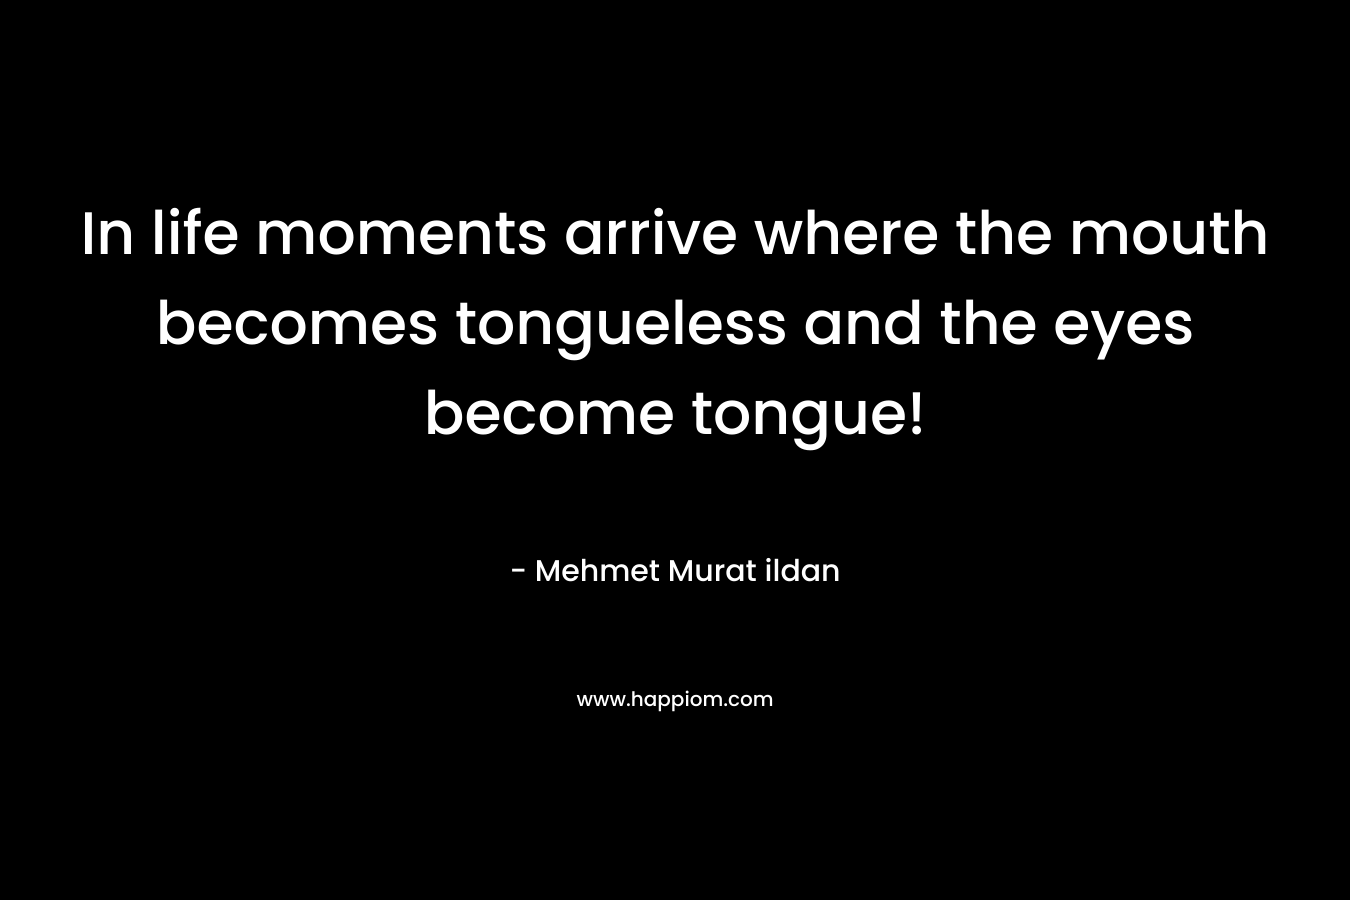 In life moments arrive where the mouth becomes tongueless and the eyes become tongue! – Mehmet Murat ildan